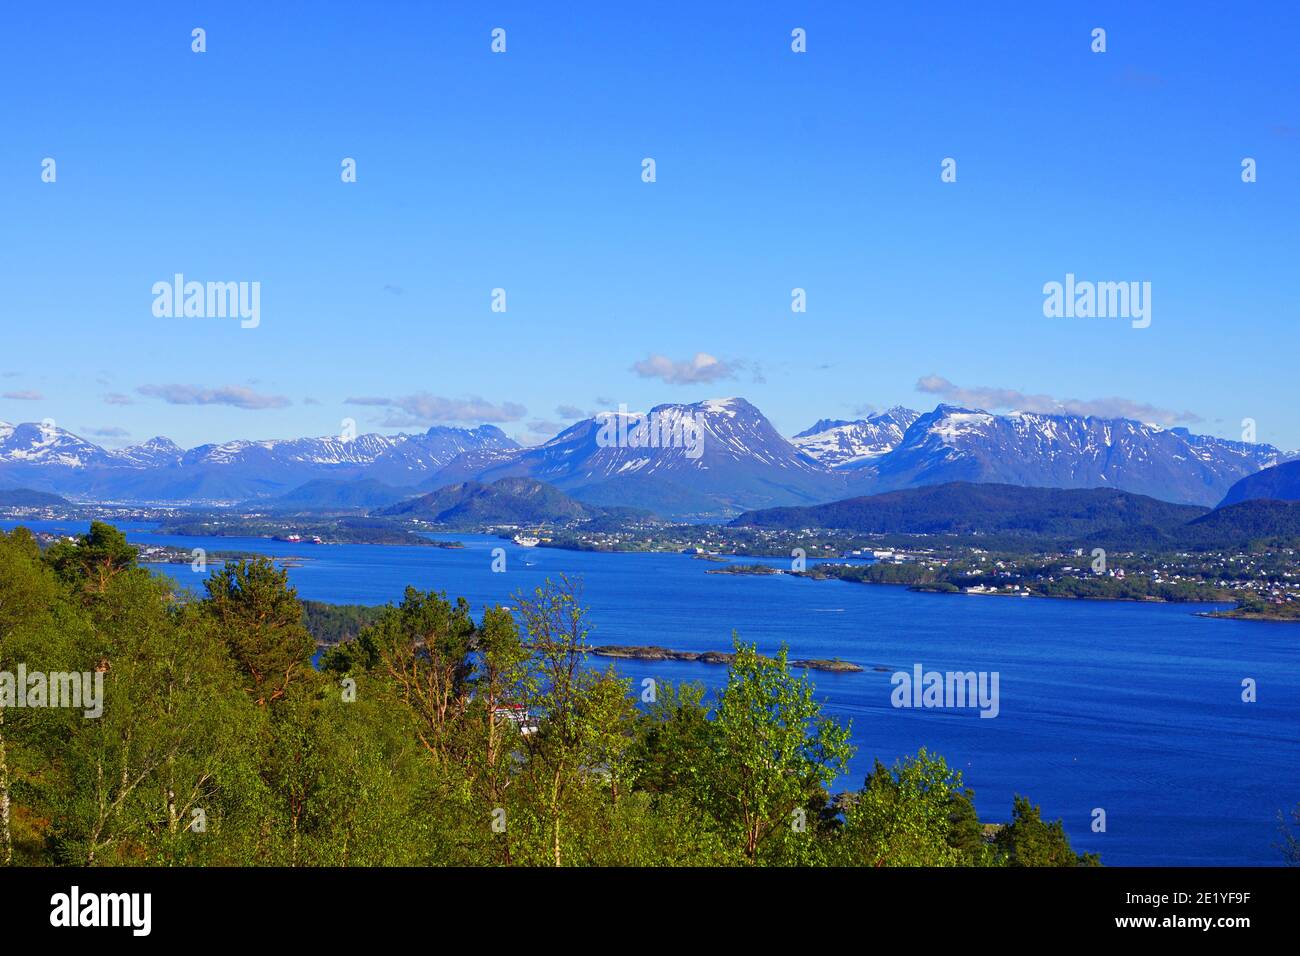 Fjord and mountains. View from Mt. Aksla in Ålesund, Norway. Stock Photo